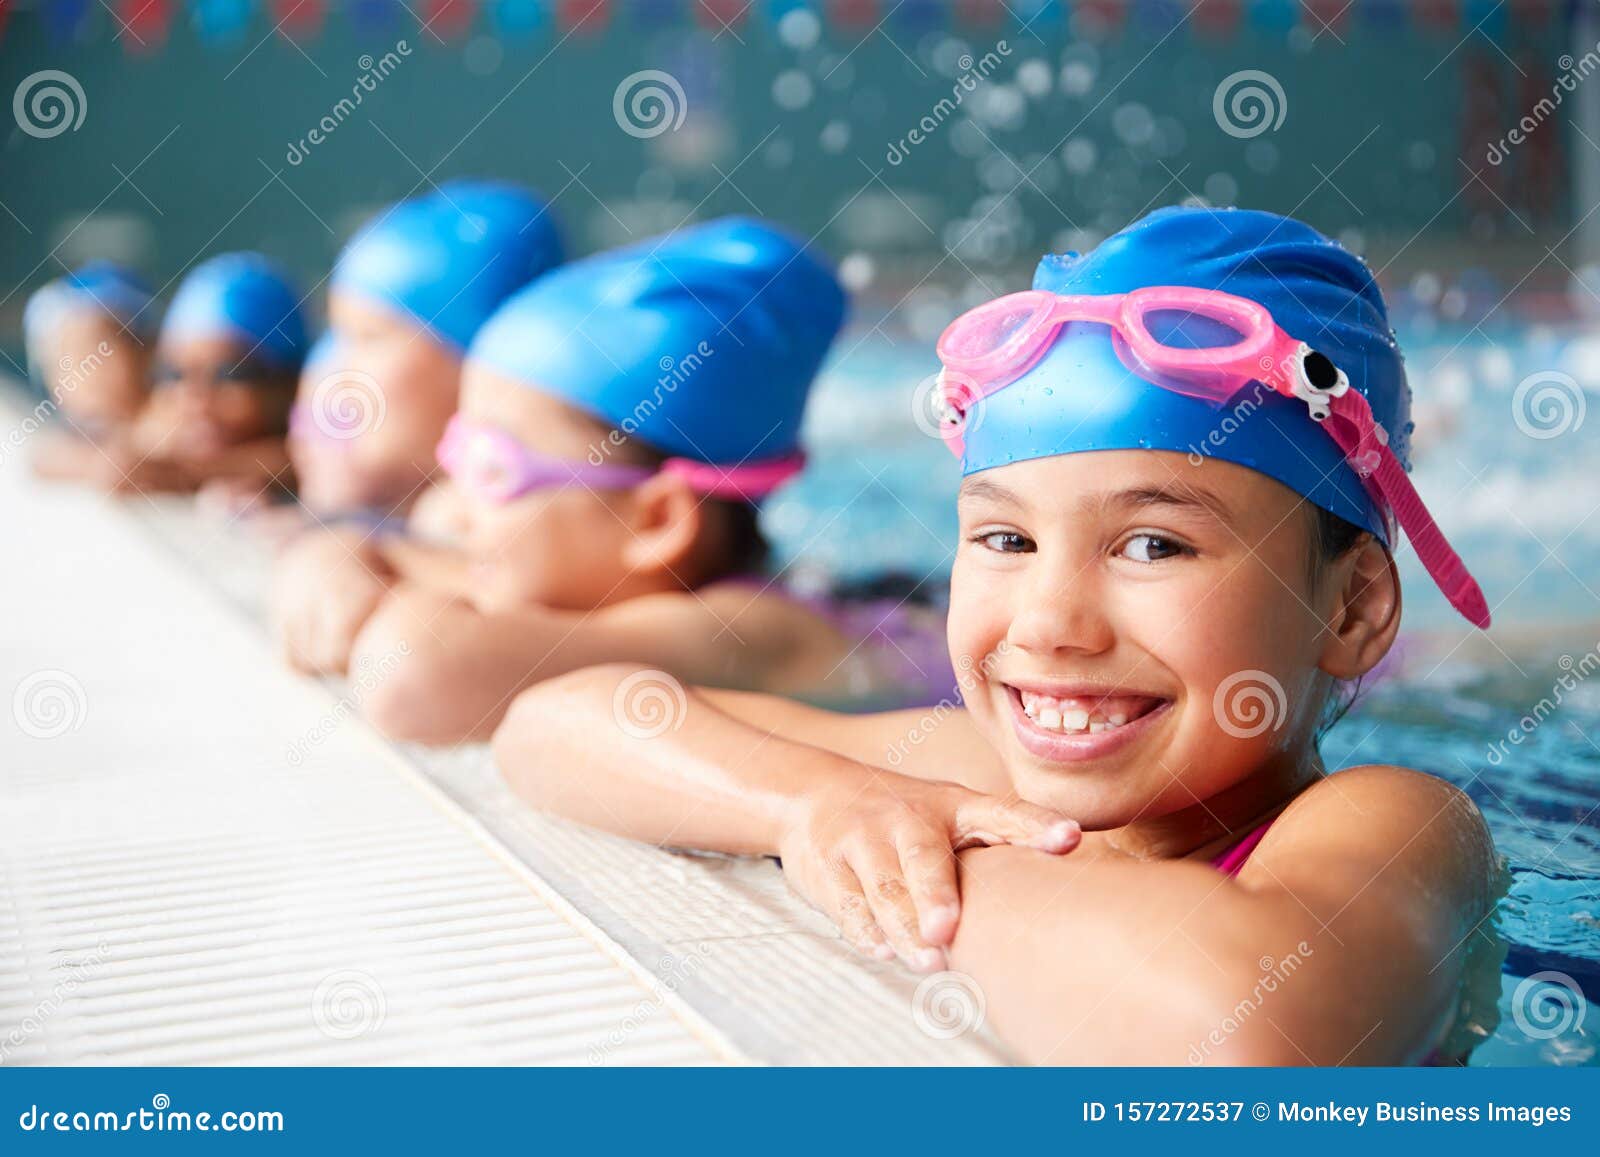 portrait of children in water at edge of pool waiting for swimming lesson